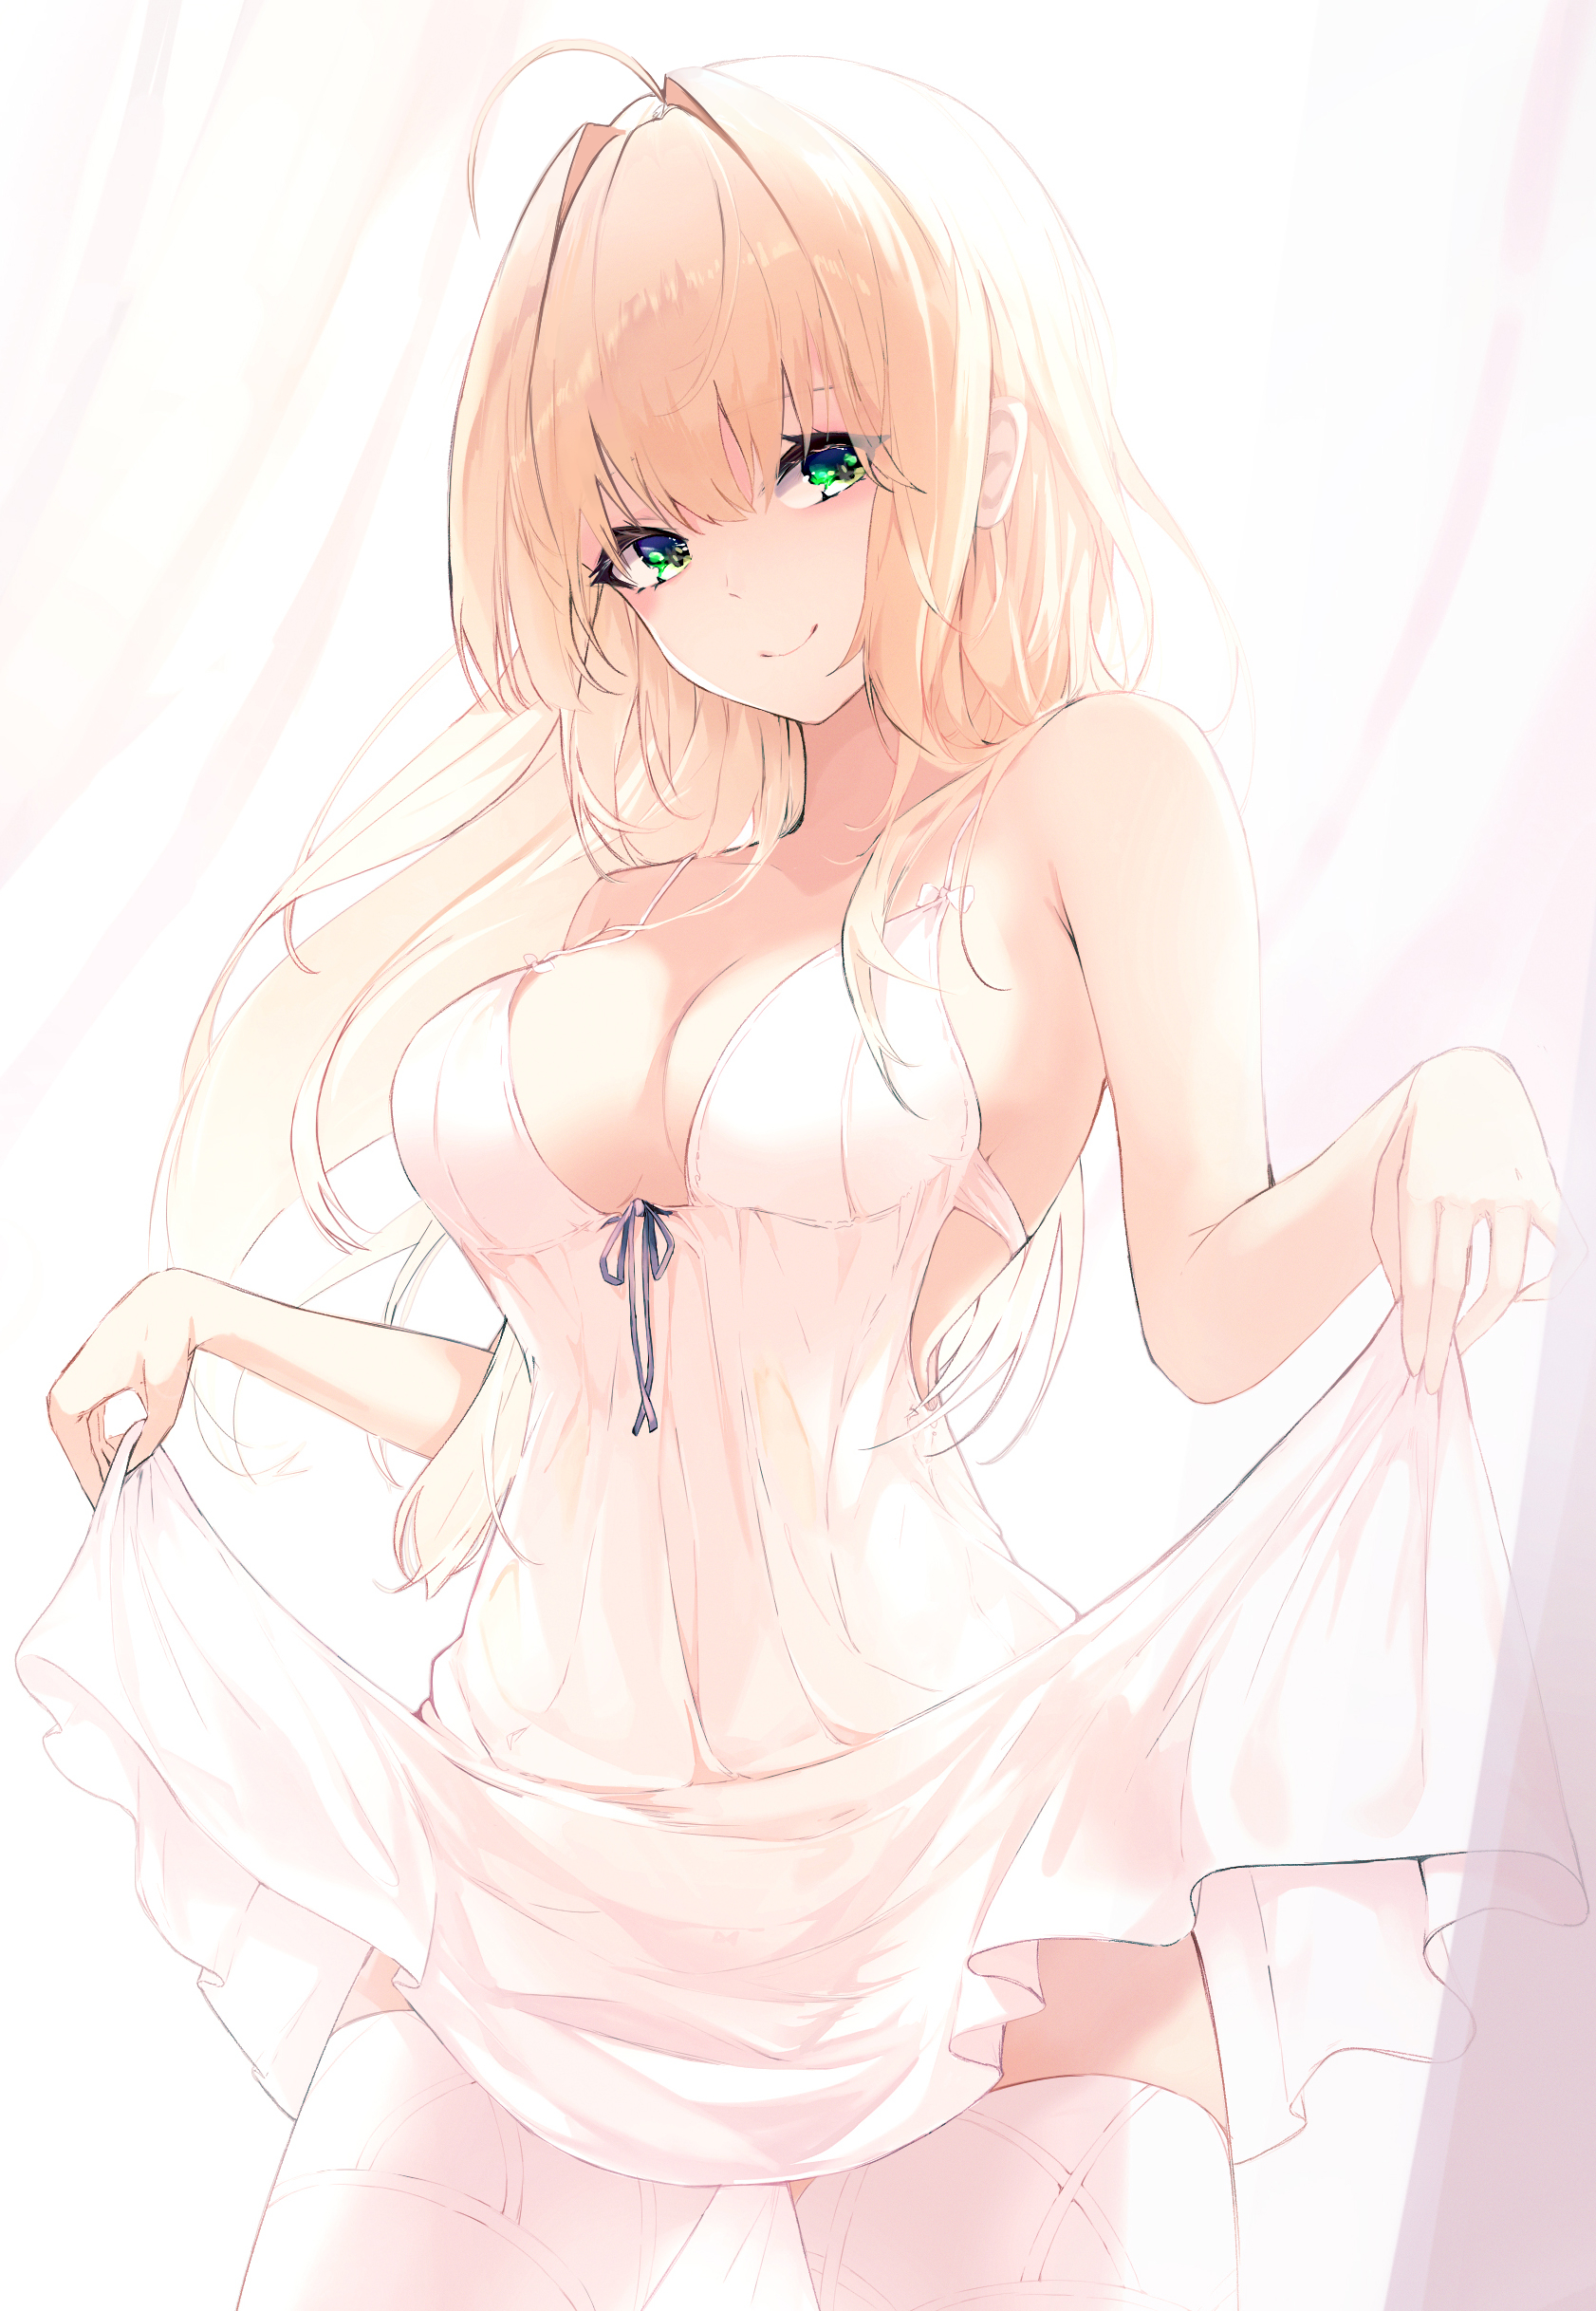 Anime 1682x2435 anime anime girls digital art artwork 2D portrait display white stockings lifting dress smiling thigh-highs dress blonde green eyes cleavage Kooemong Fate series Fate/Grand Order Fate/Extra Nero Claudius standing